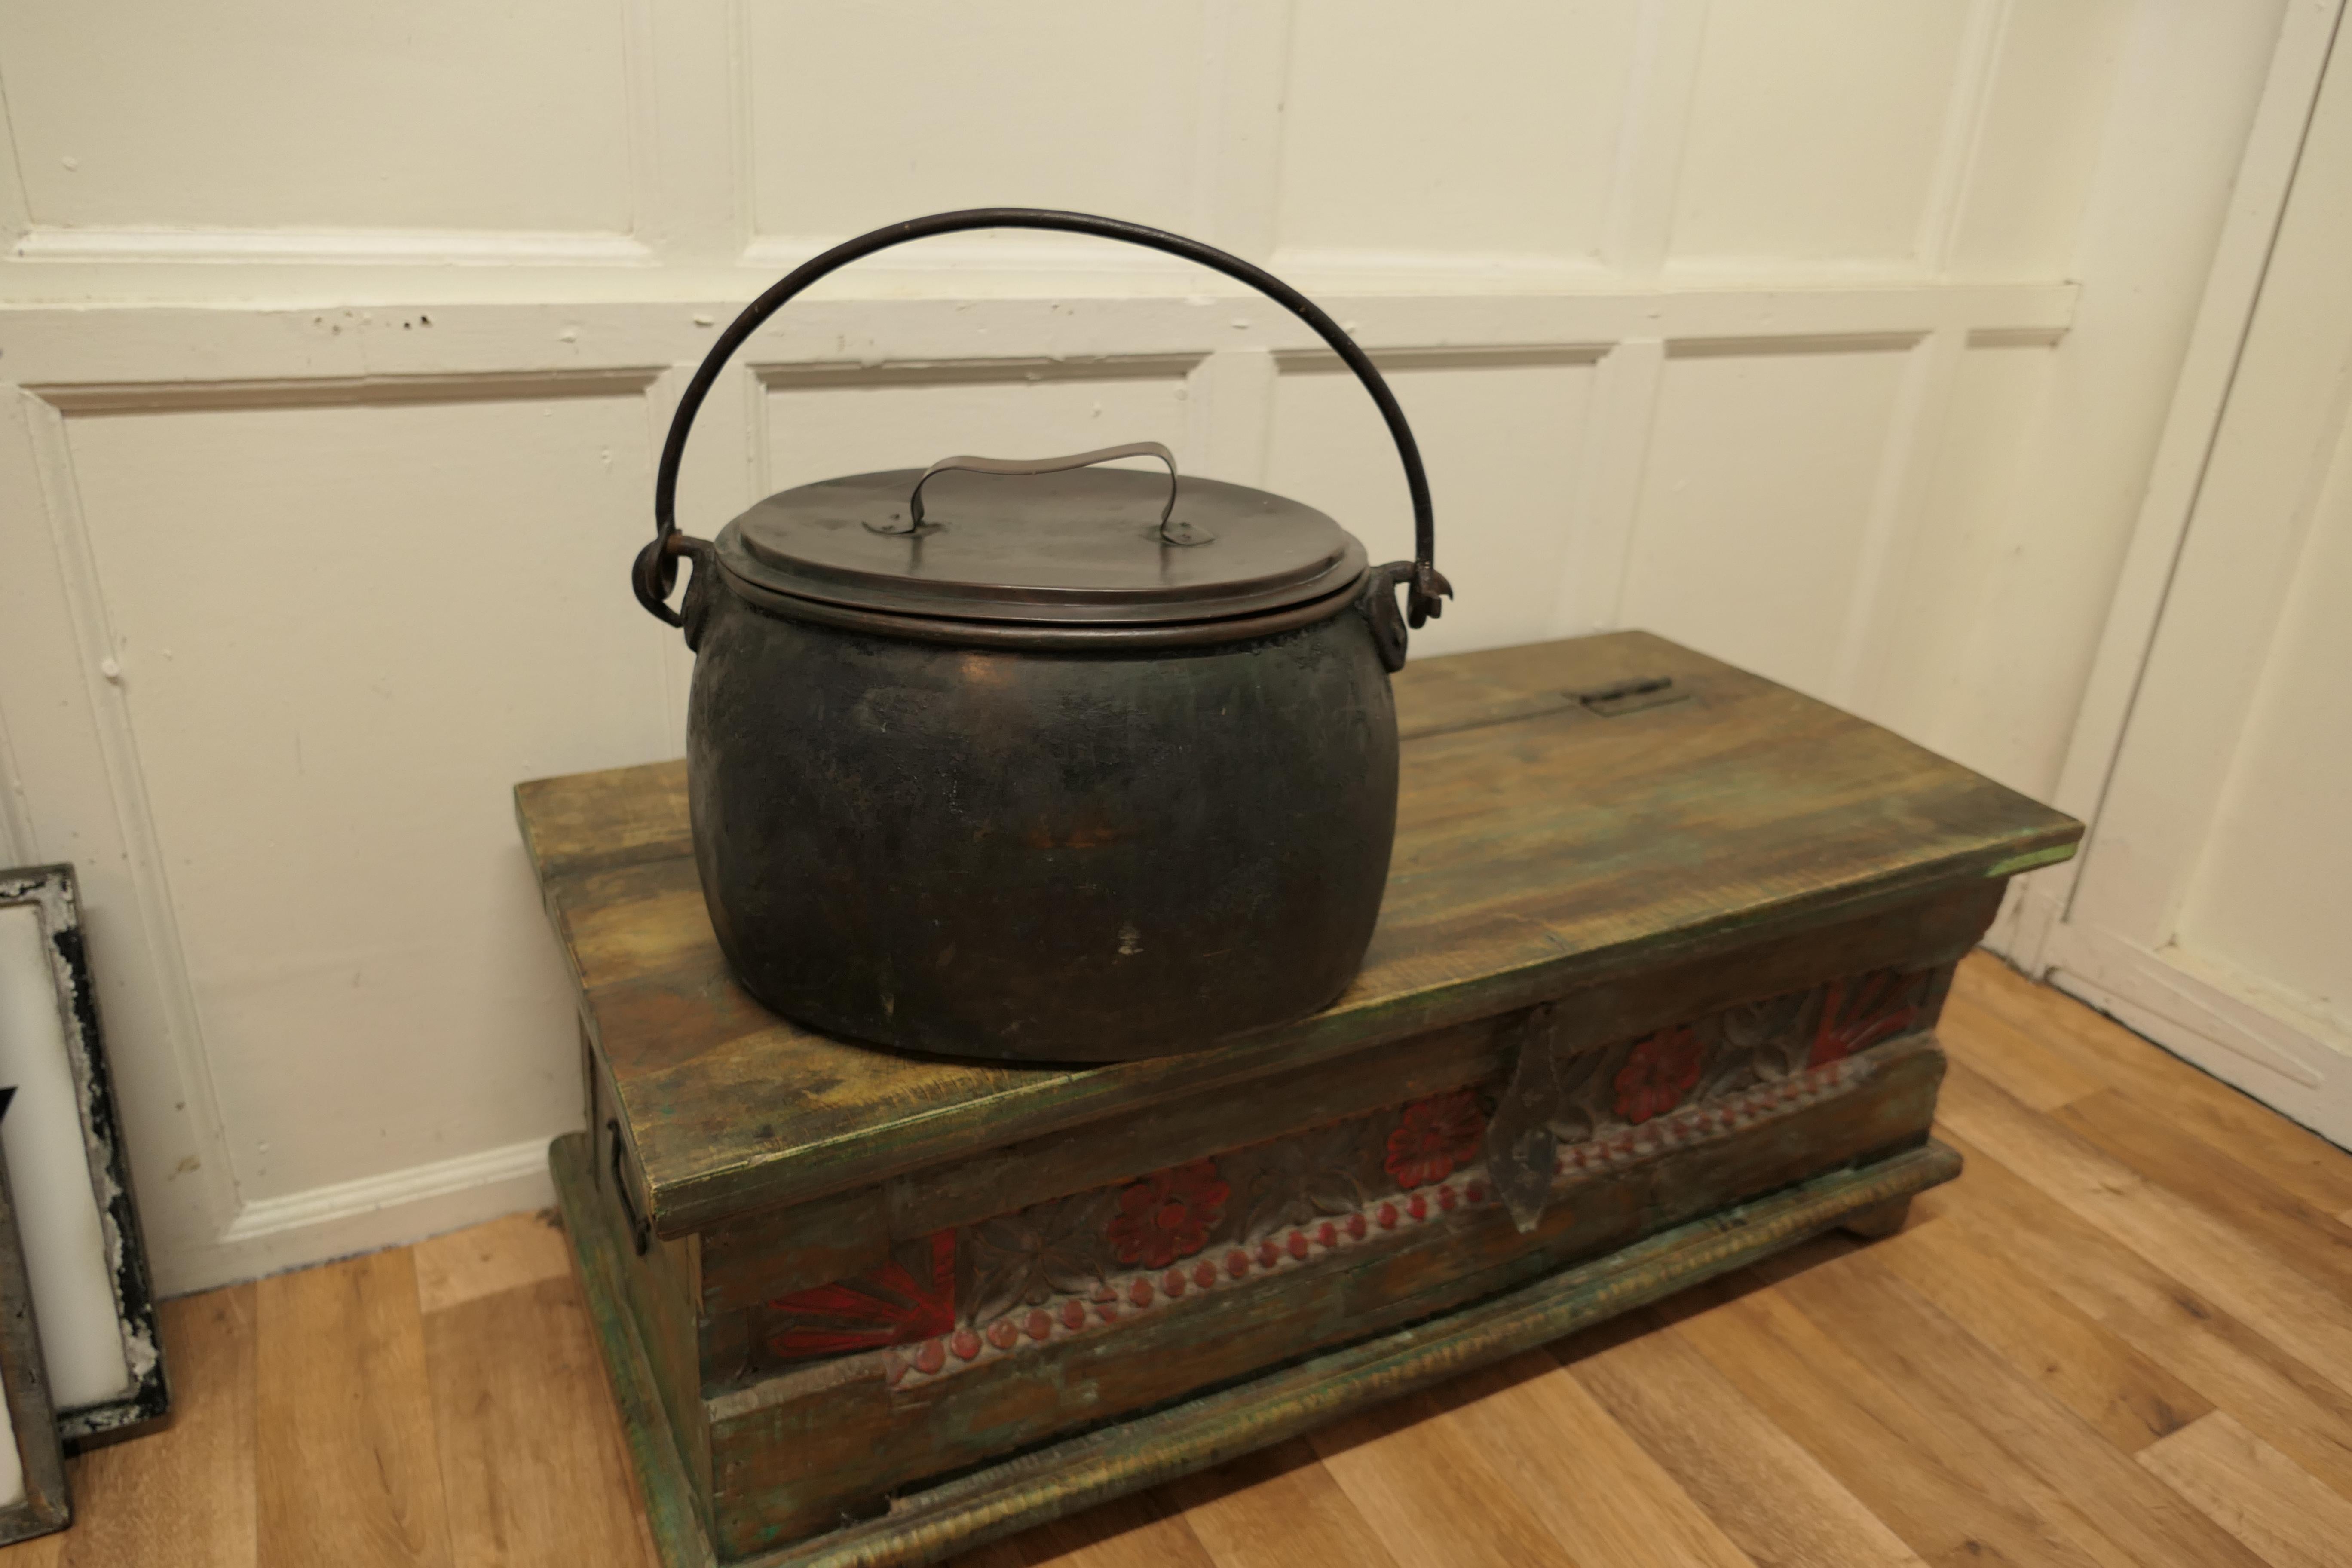 19th Century copper cooking pot cauldron with lid.

This is a lovely looking and very rare find, a 19th Century cooking pot, this piece is totally original just as though it came straight from the fire.
The lid fits tightly and there are no